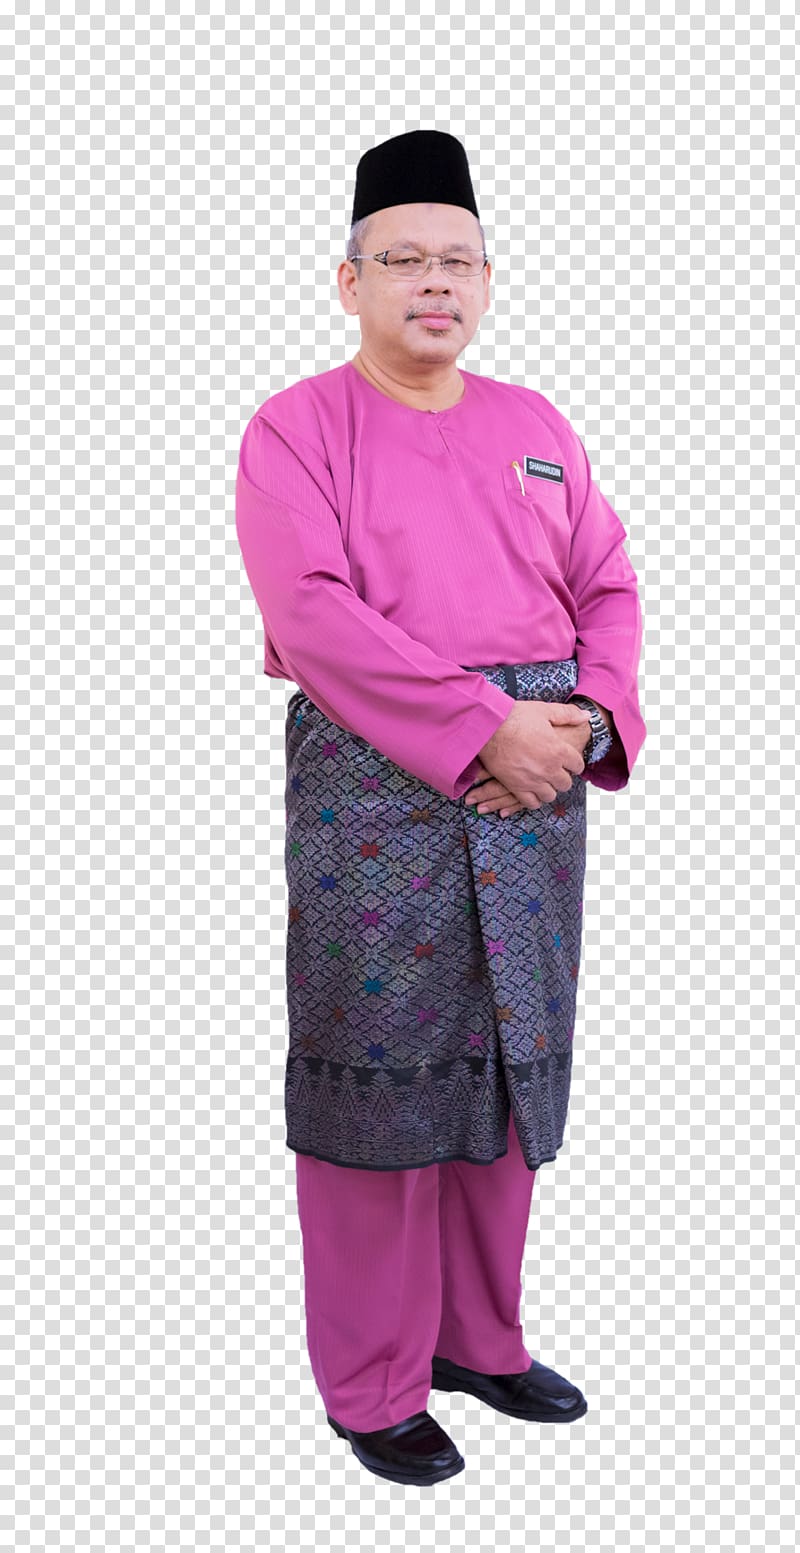 Ministry of Education Jalan Timbalan Costume Professional, Abdul Sharif transparent background PNG clipart